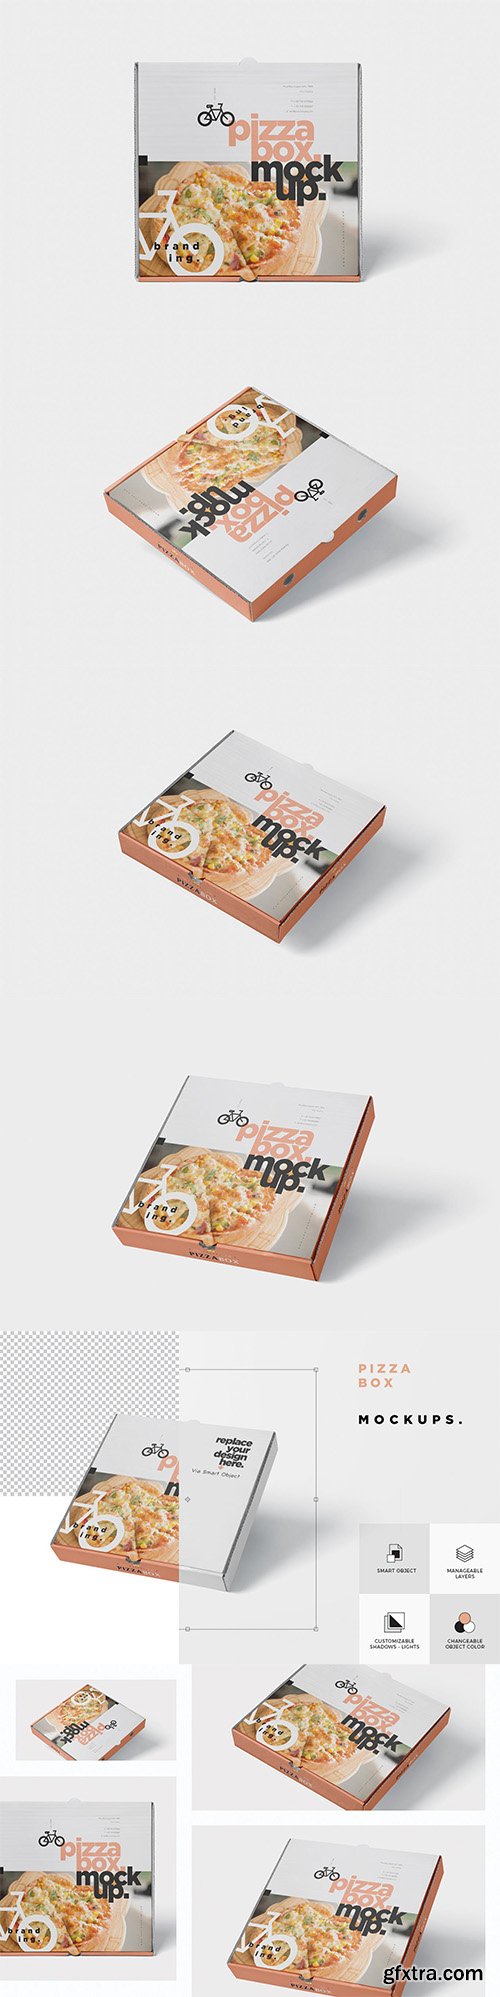 Pizza Box Mock-Up - Grocery Store Edition